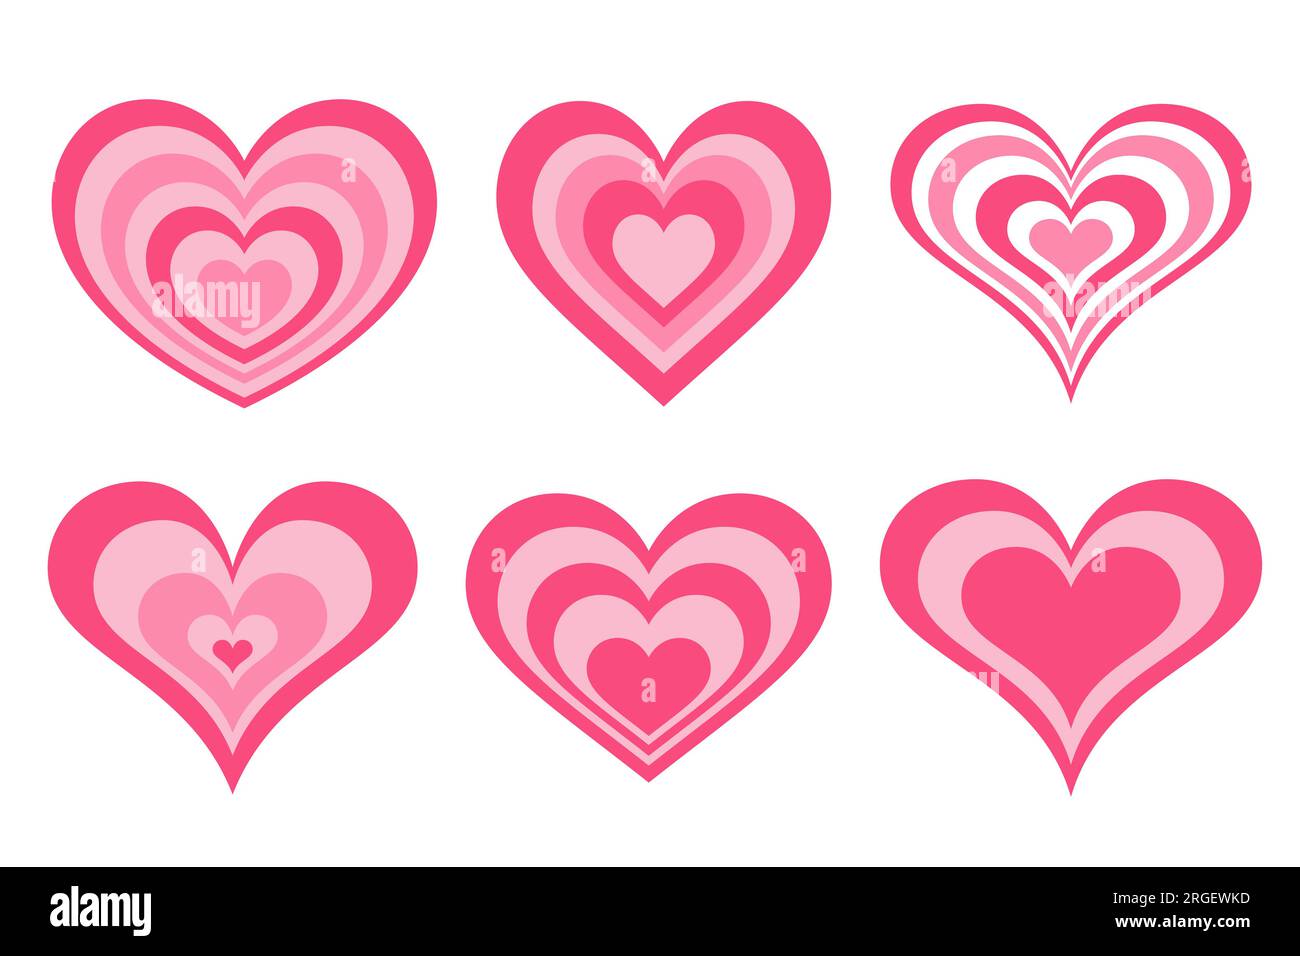 https://c8.alamy.com/comp/2RGEWKD/y2k-pink-hearts-groovy-girly-retro-shapes-aesthetic-trendy-design-elements-set-of-valentine-abstract-stickers-vector-collection-2RGEWKD.jpg